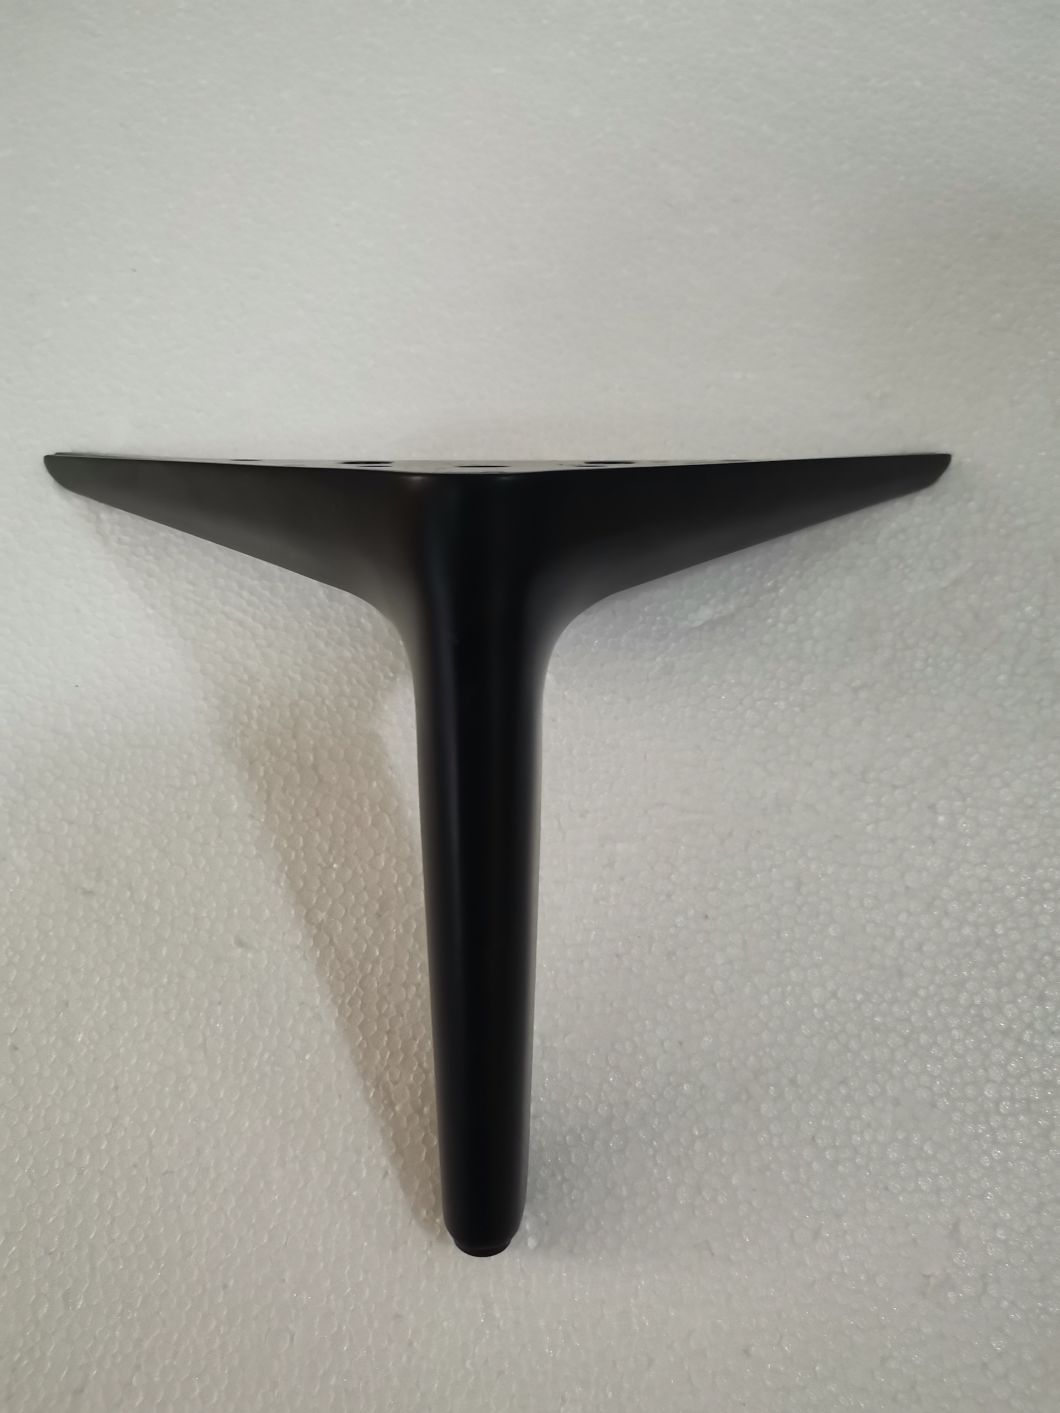 Semi-Round Foot Metal Sofa Feet Bedside TV Cabinet Coffee Table Support Legs